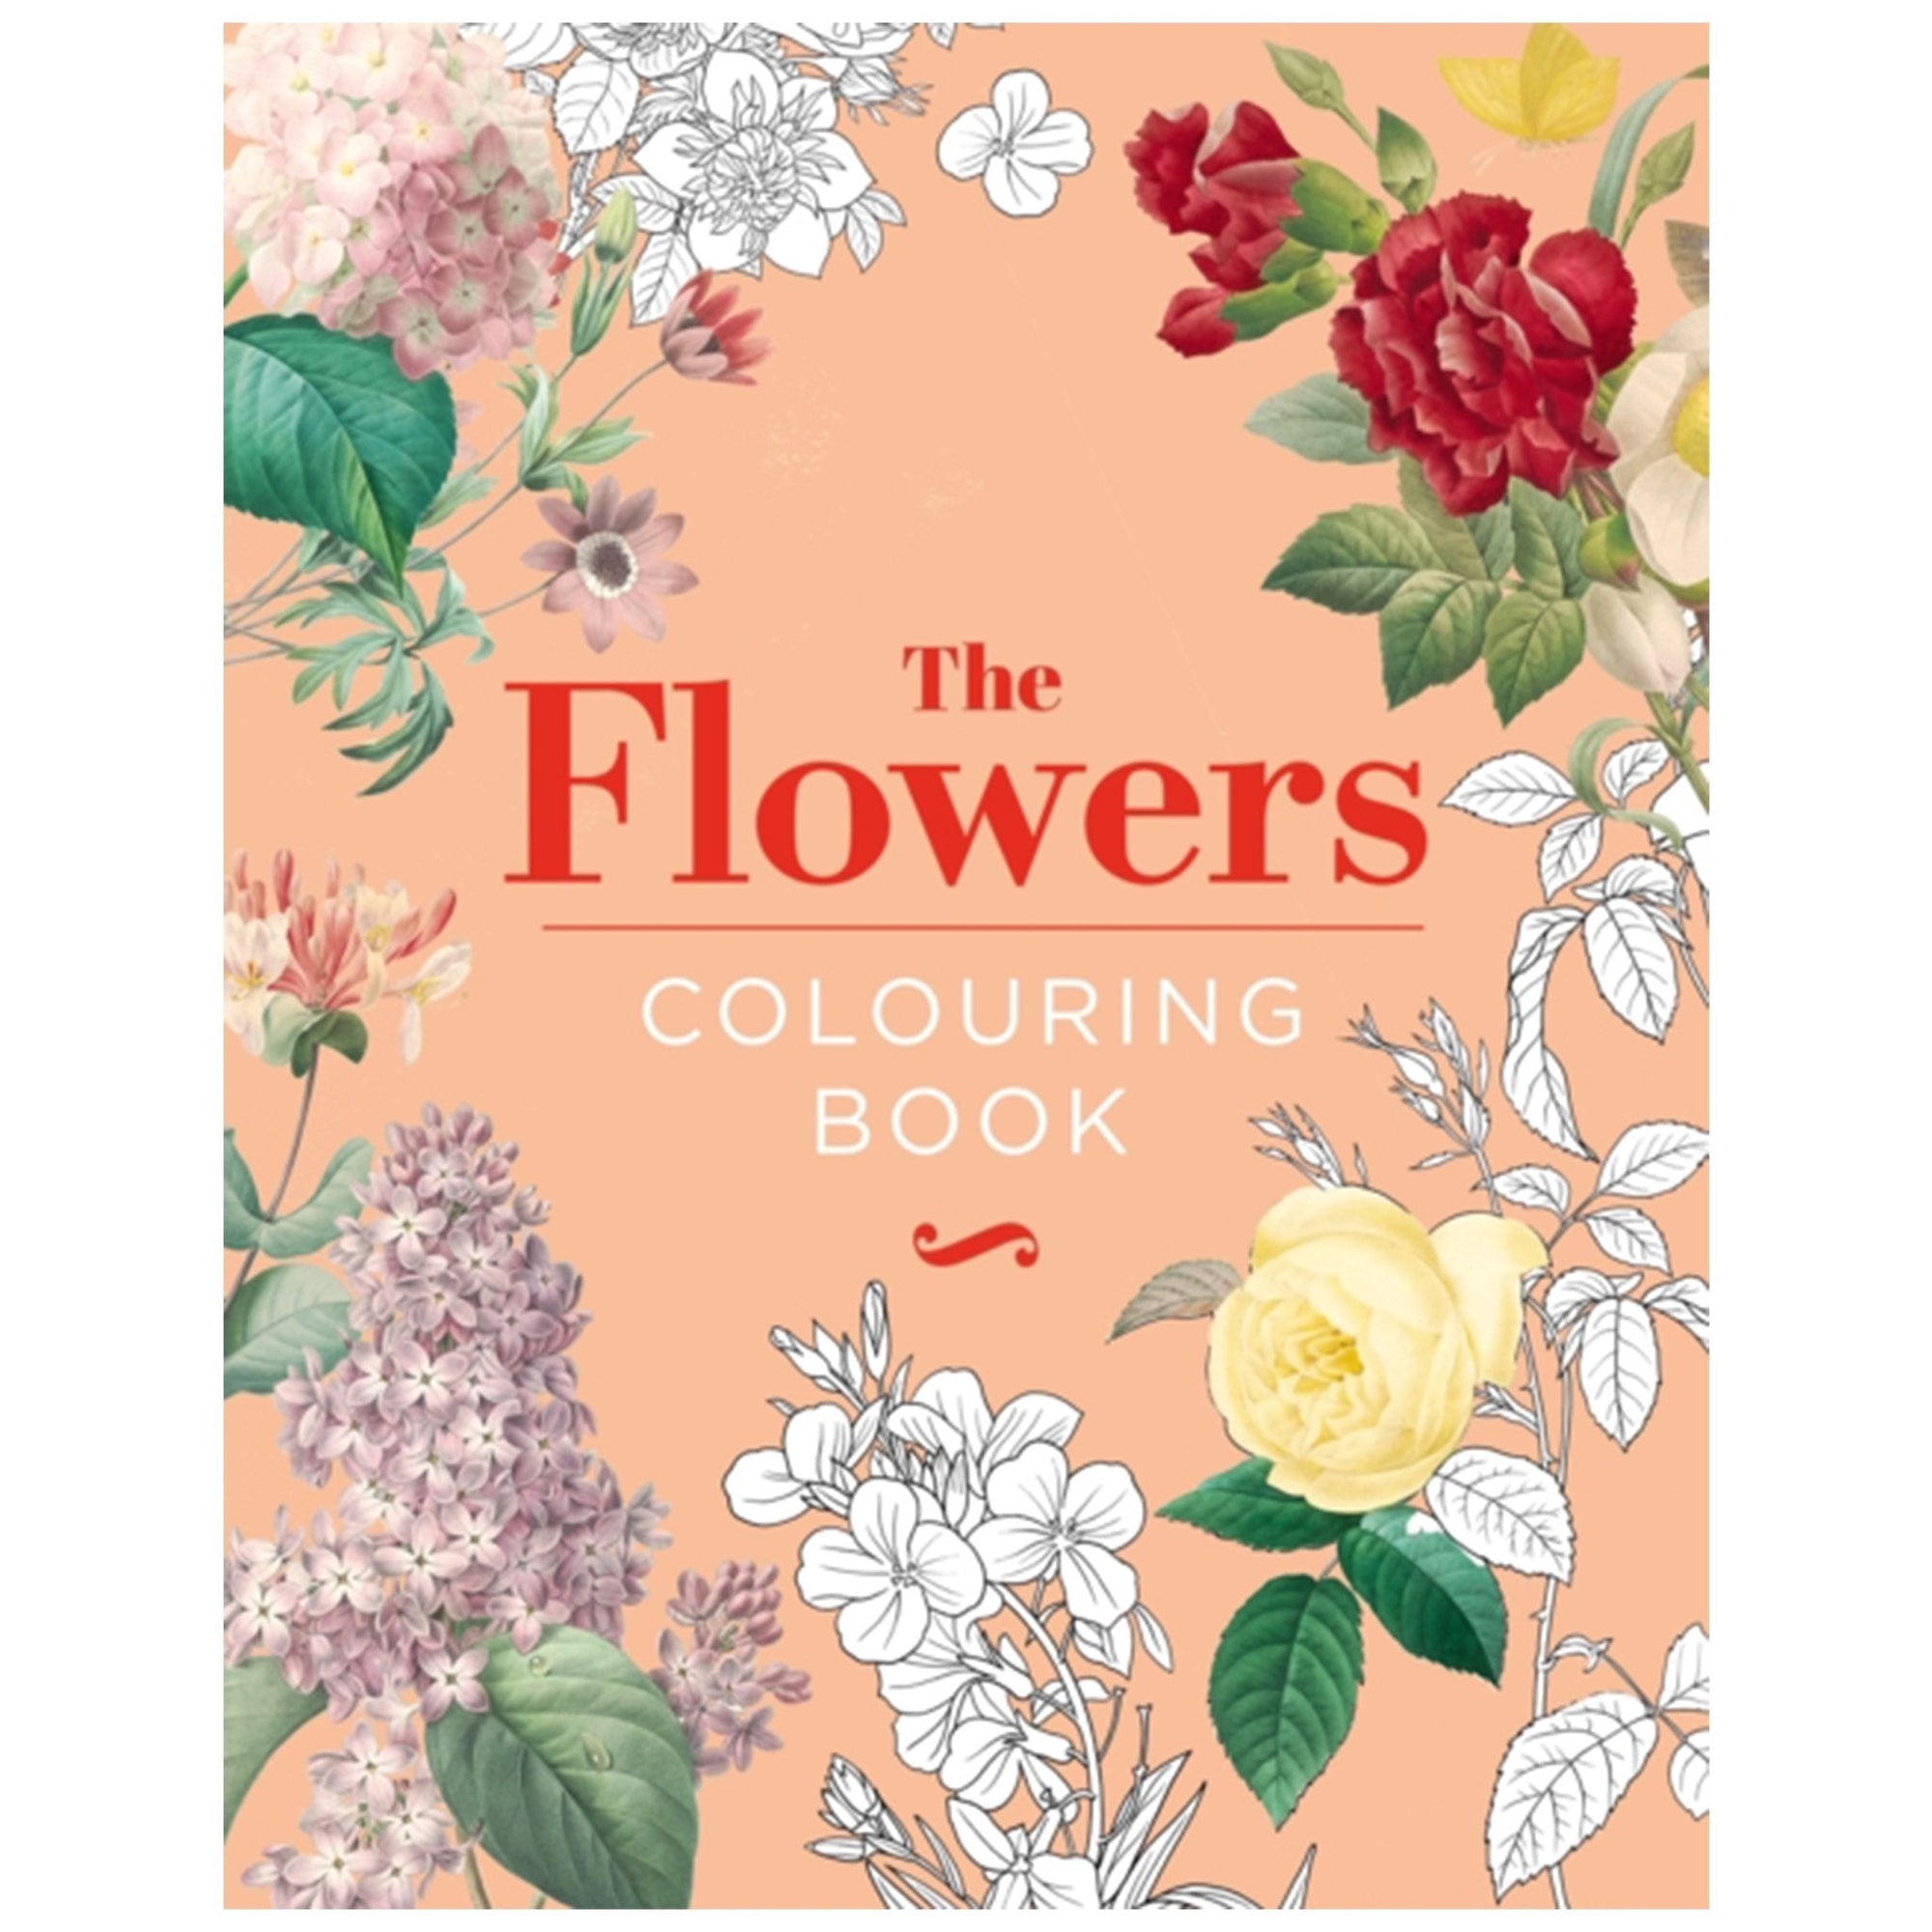 The Flowers Colouring Book: Hardback Gift Edition - Peter Gray - boo•kay ldn